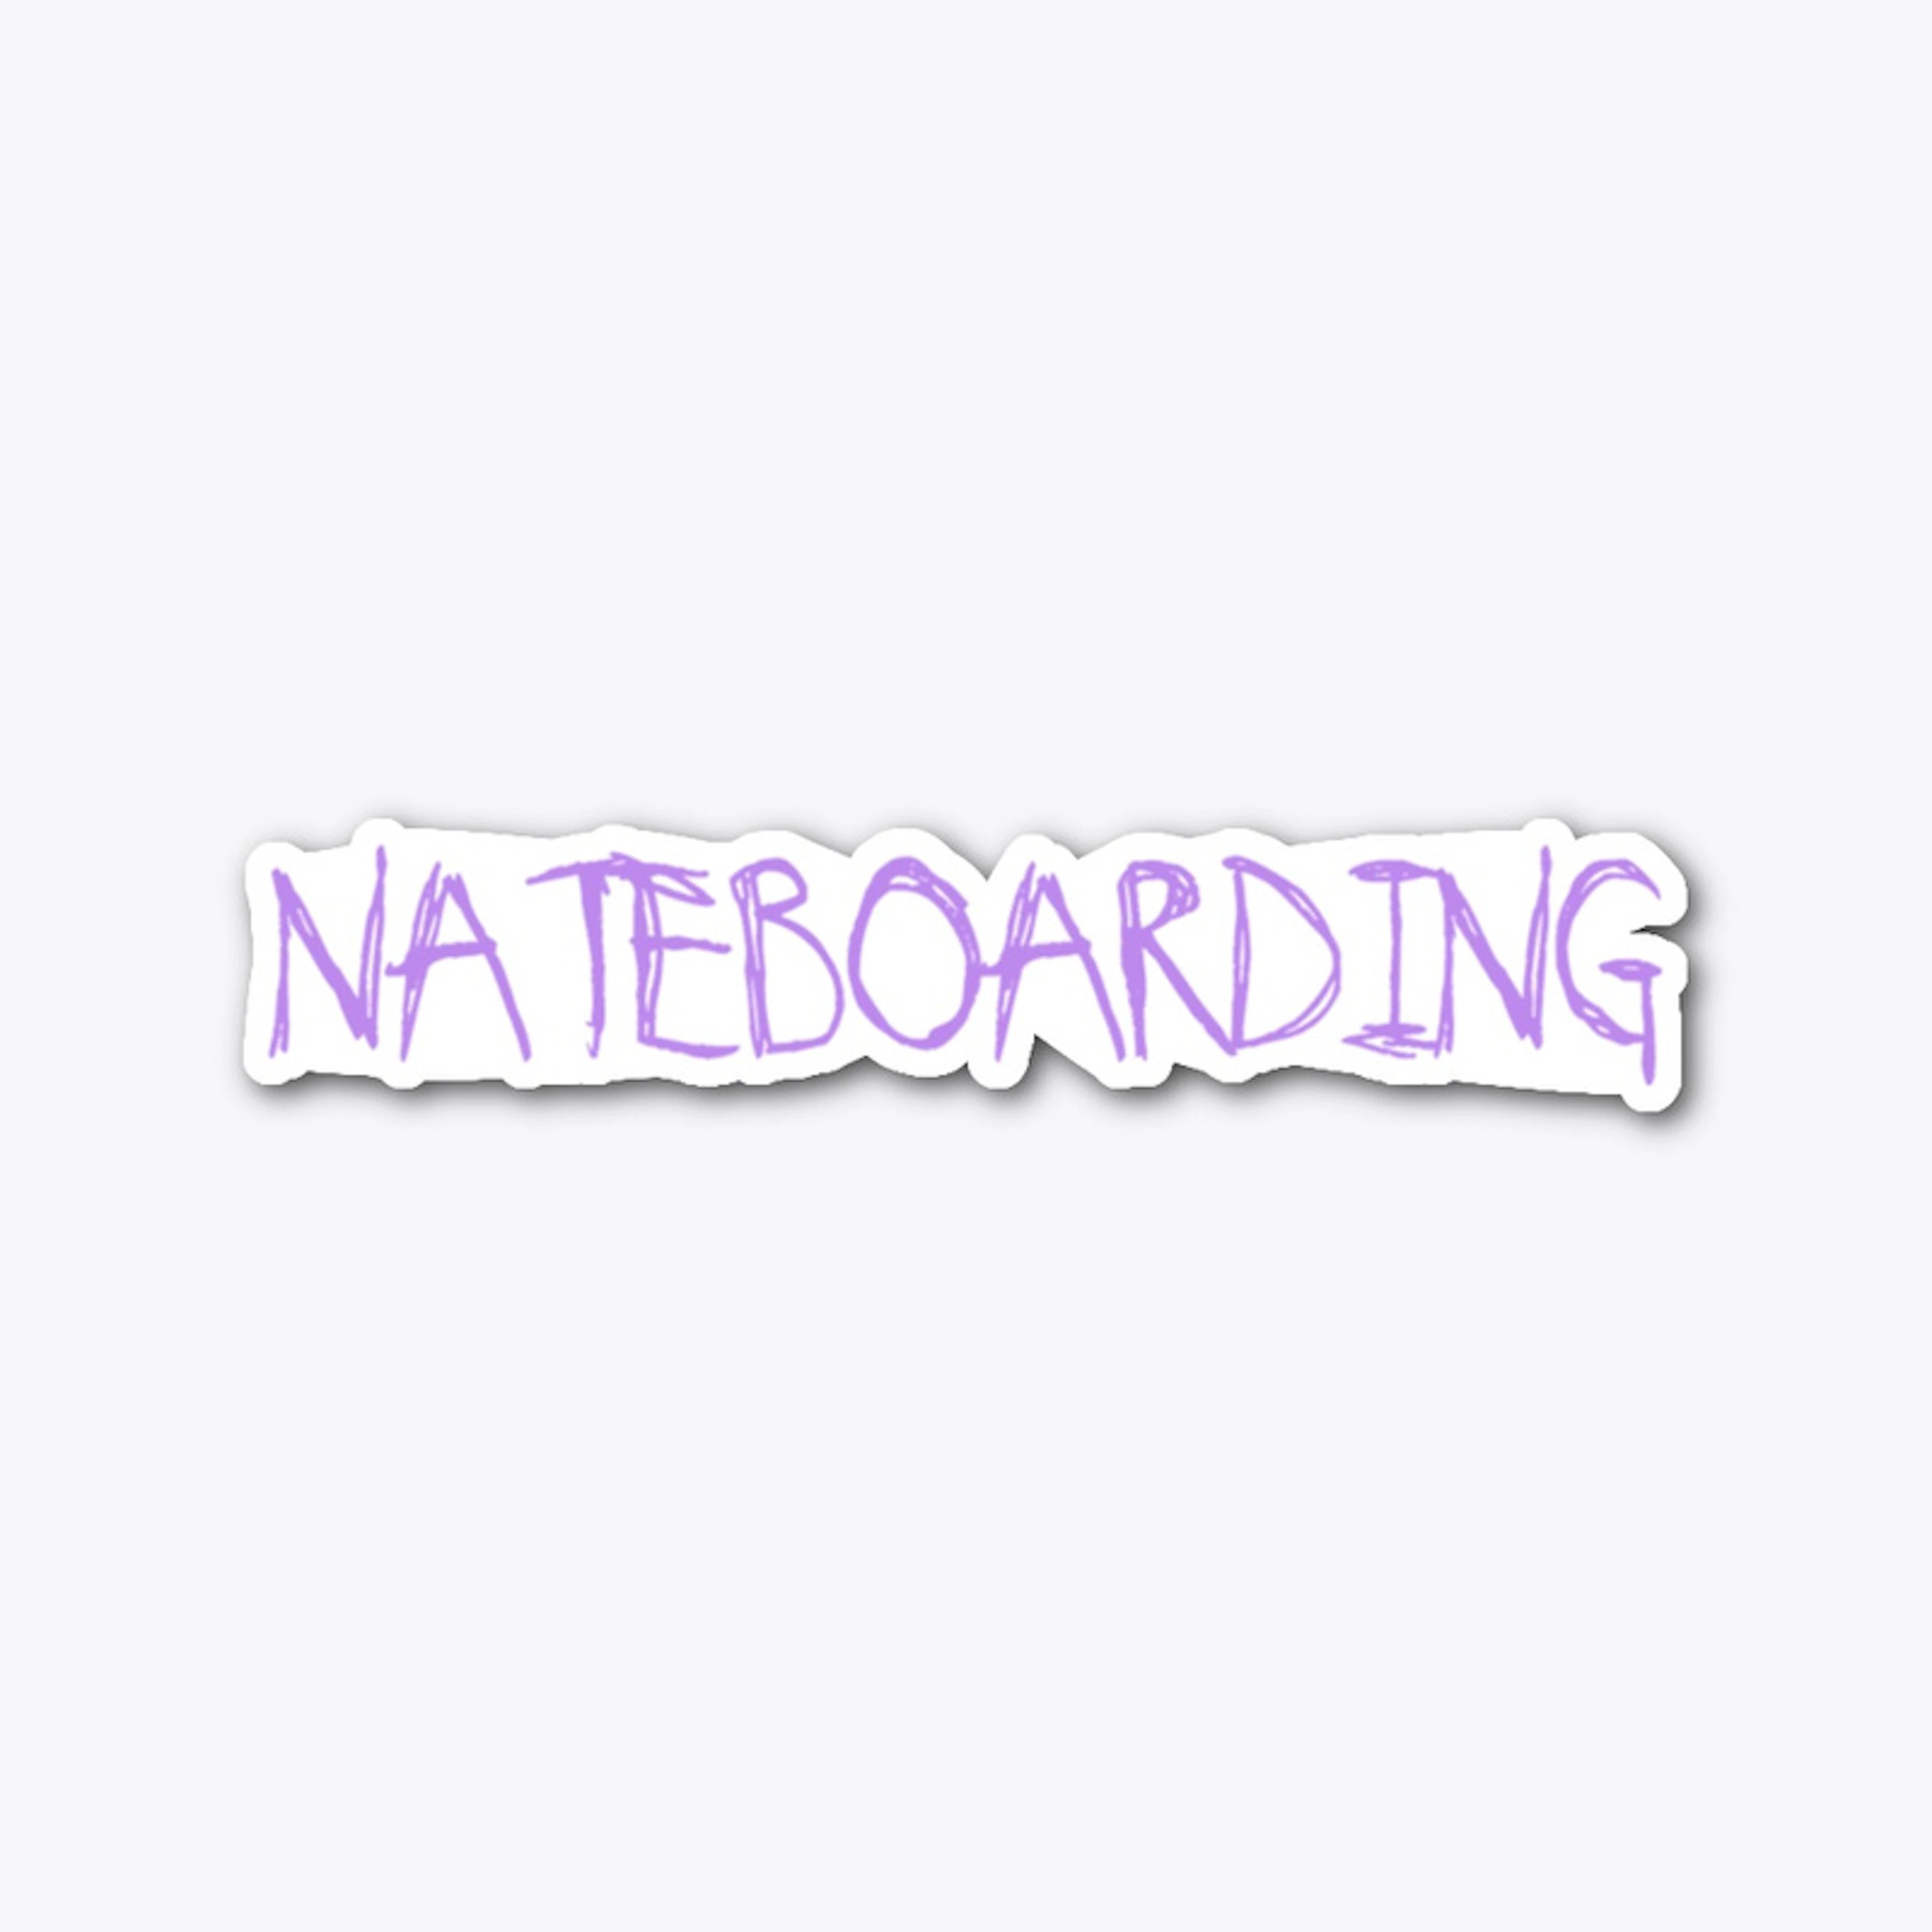 Nateboarding "Love Your Friends"